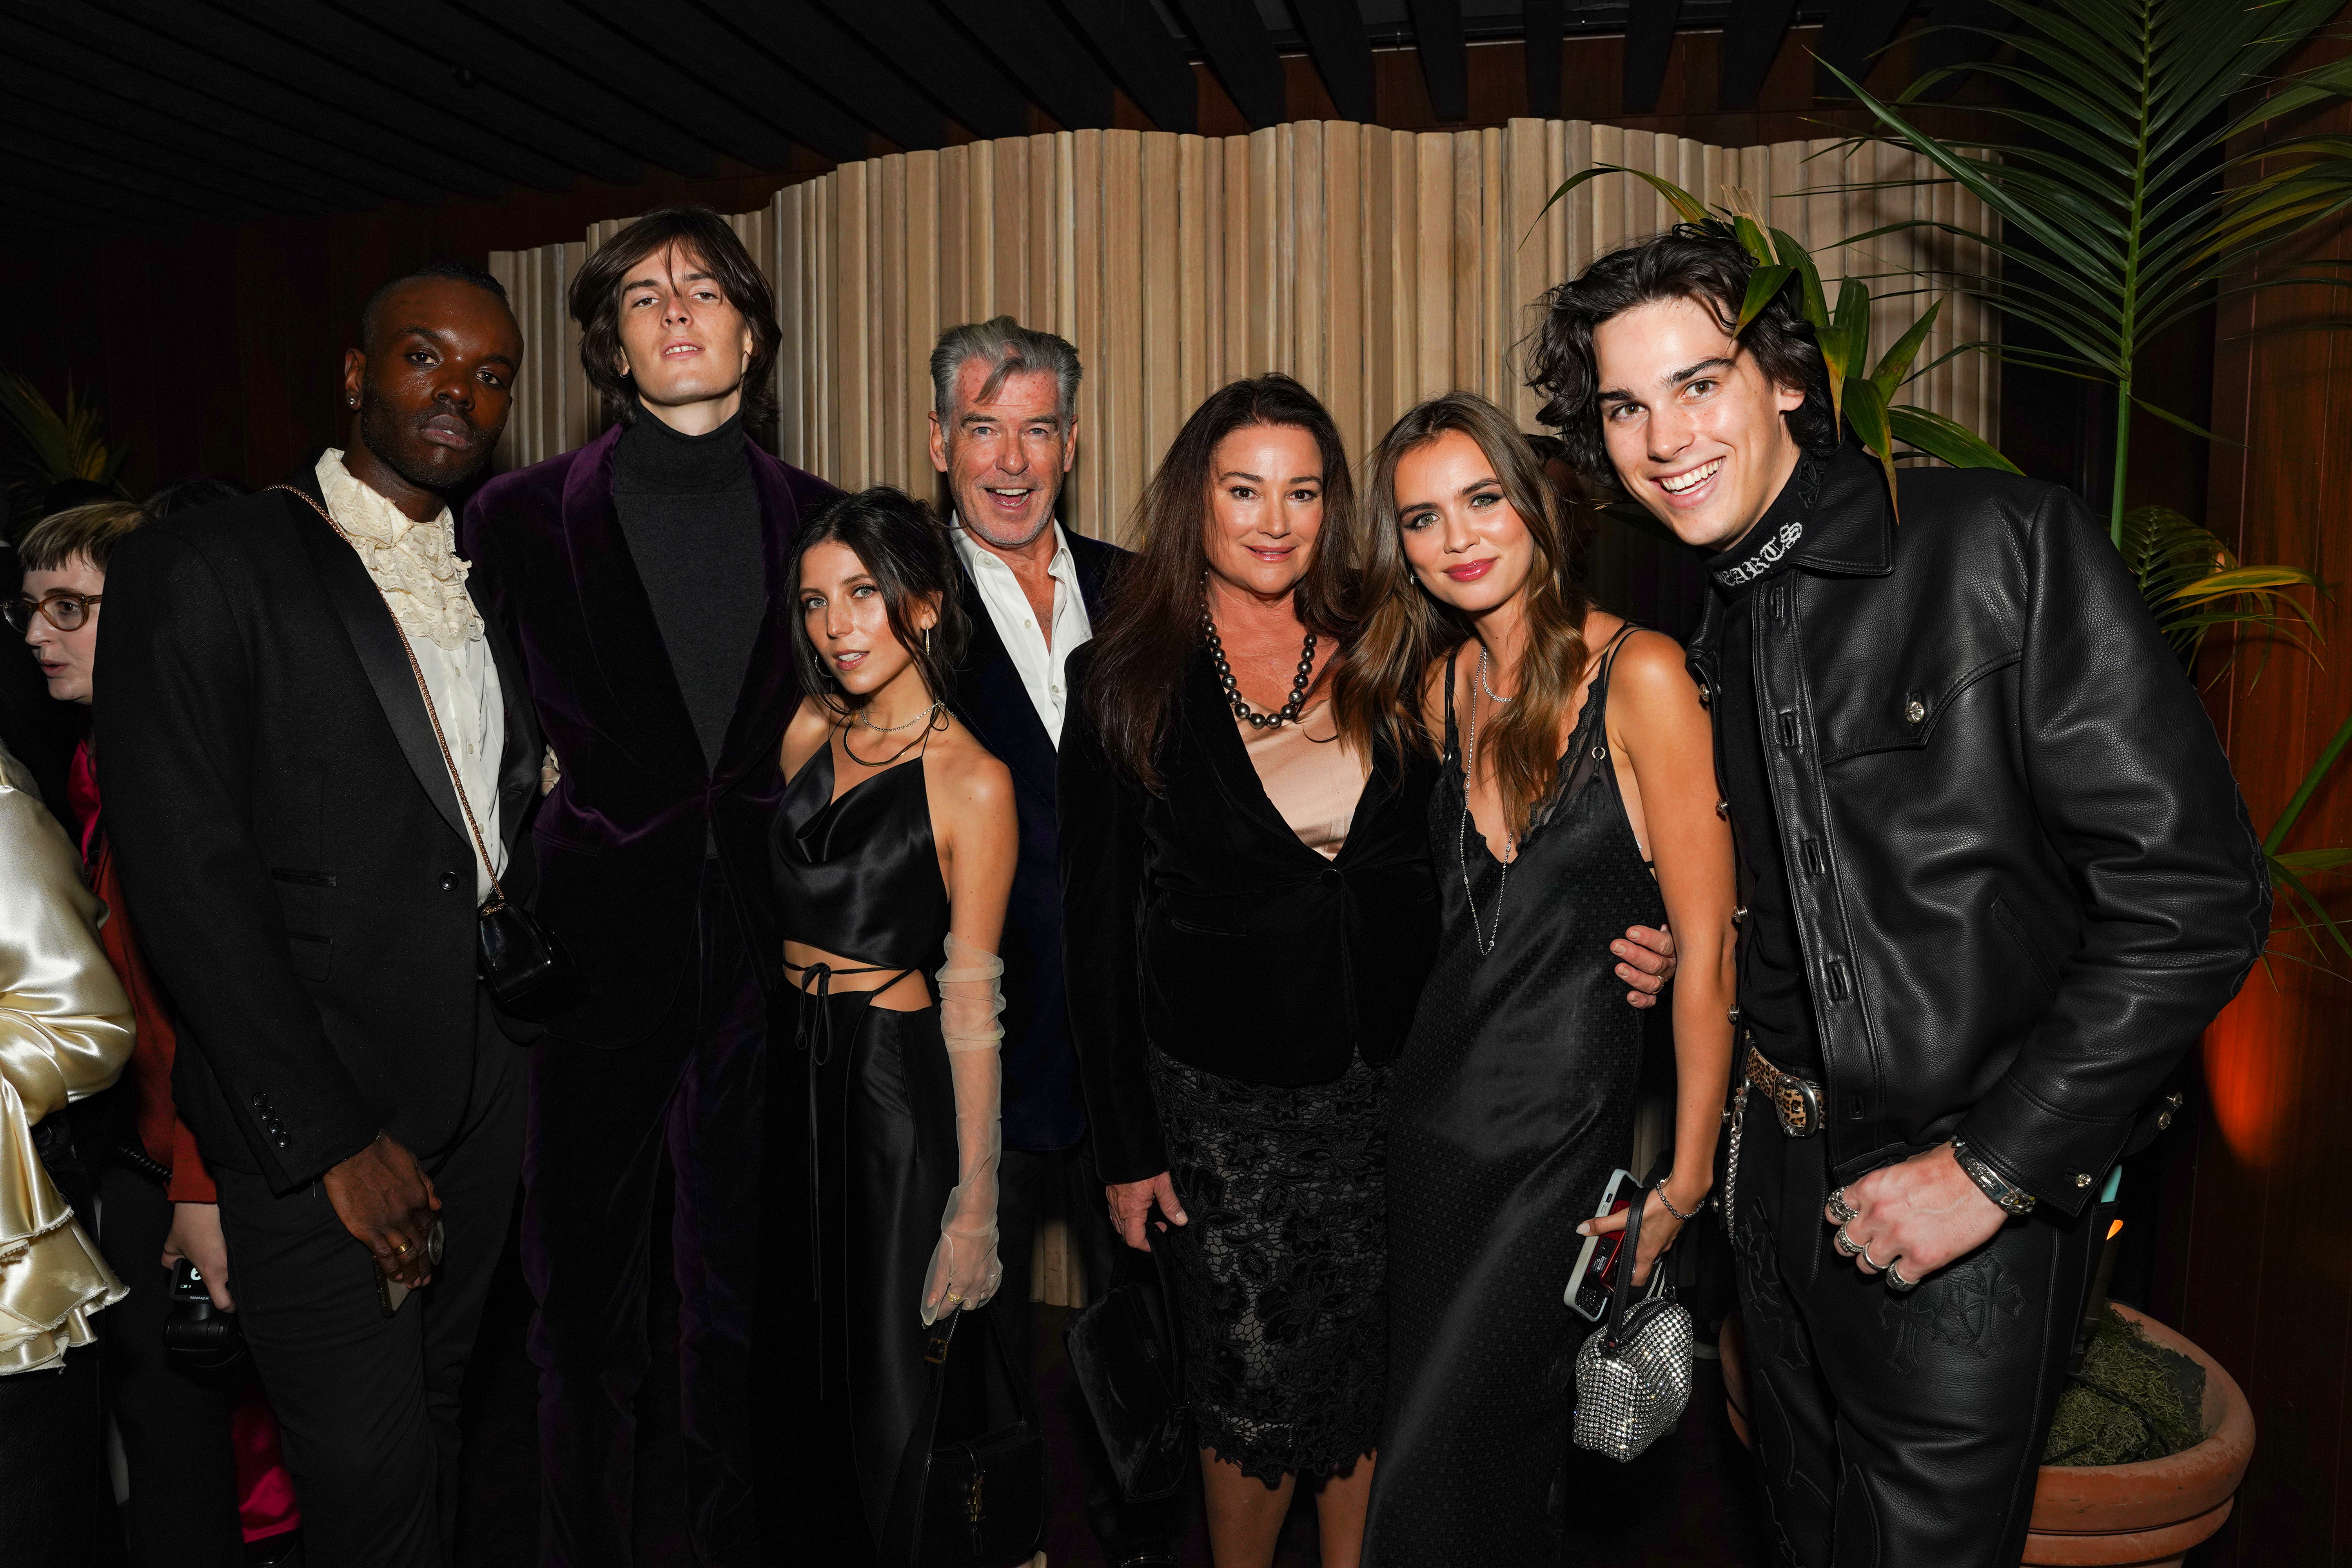 Jean-Claude Kalí, Dylan Brosnan, Avery Wheless, Pierce Brosnan, Keely Shaye Smith, Alex Lee-Aillón and Paris Brosnan on November 17, 2022 in West Hollywood, California | Source: Getty Images